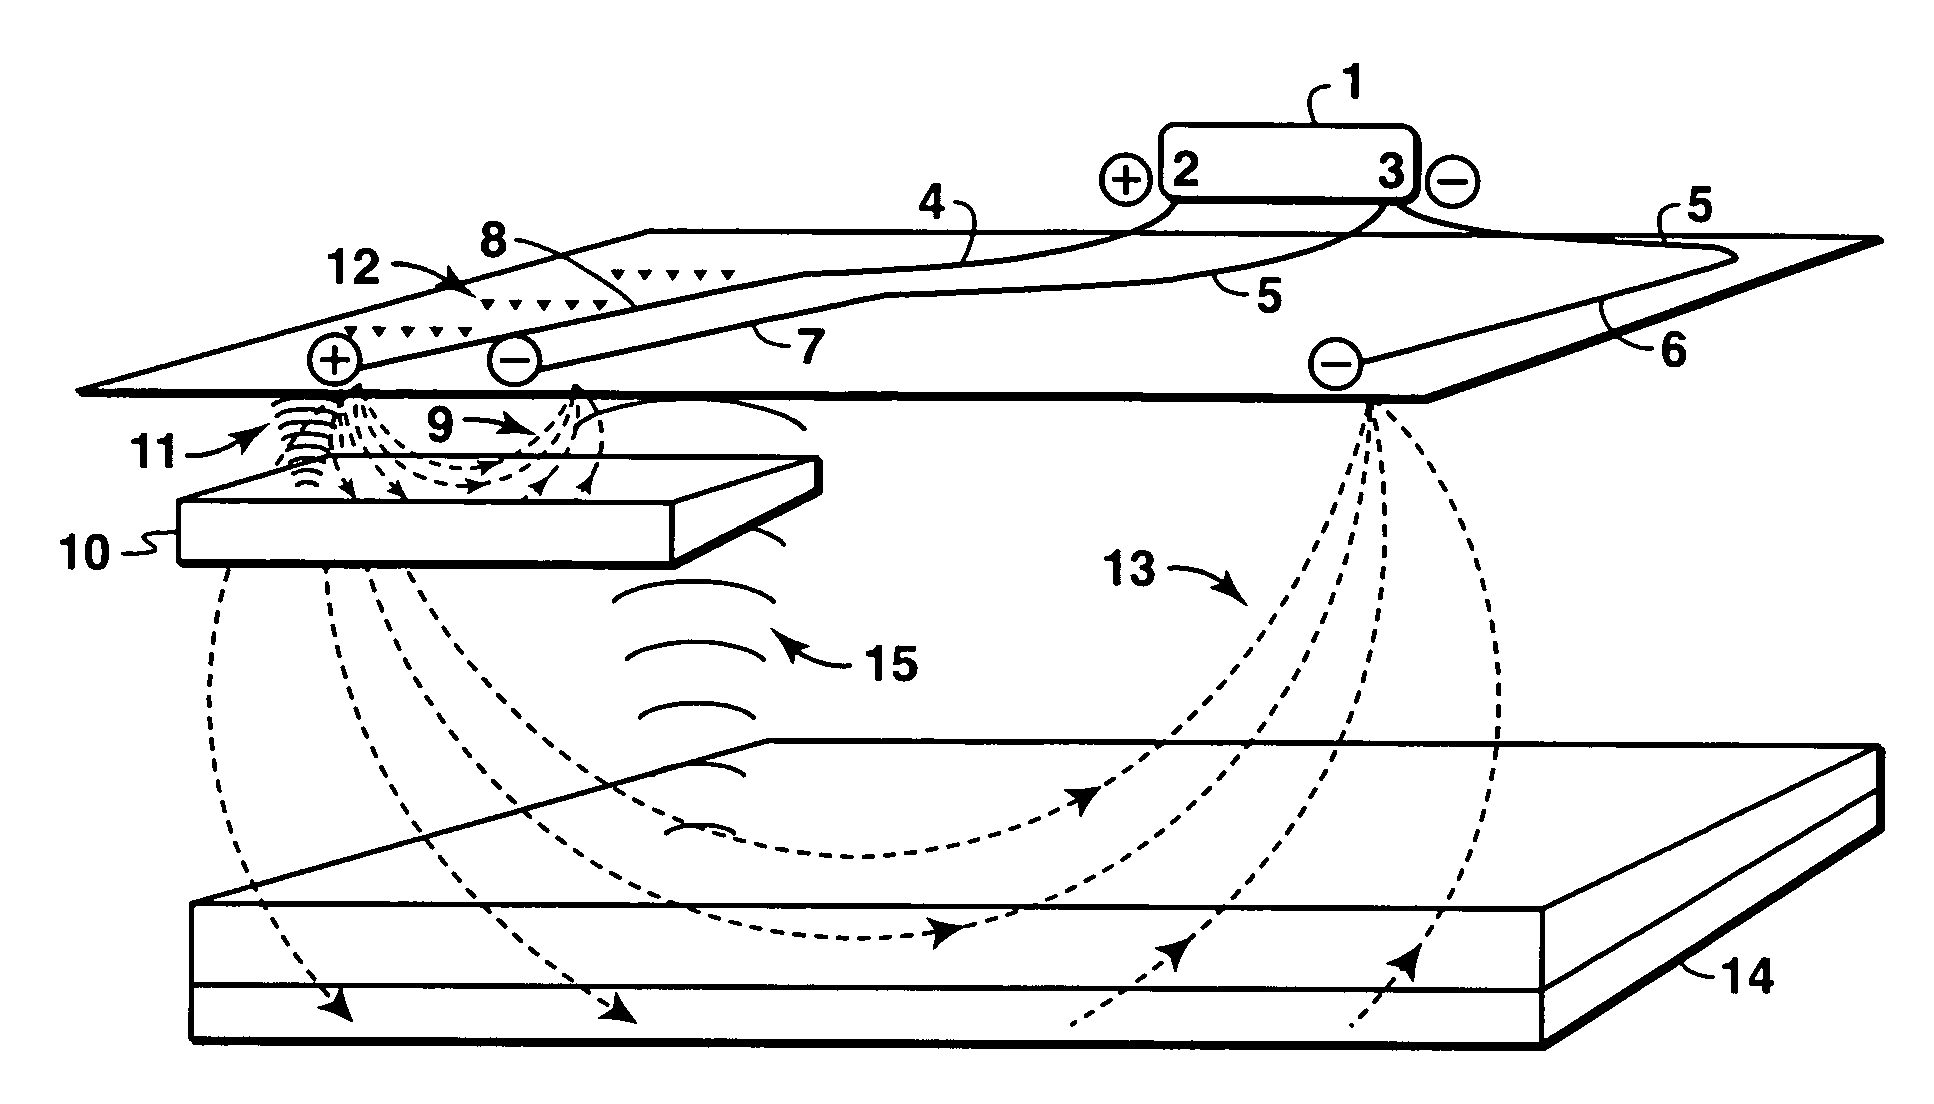 Electrode configurations for suppression of electroseismic source noise